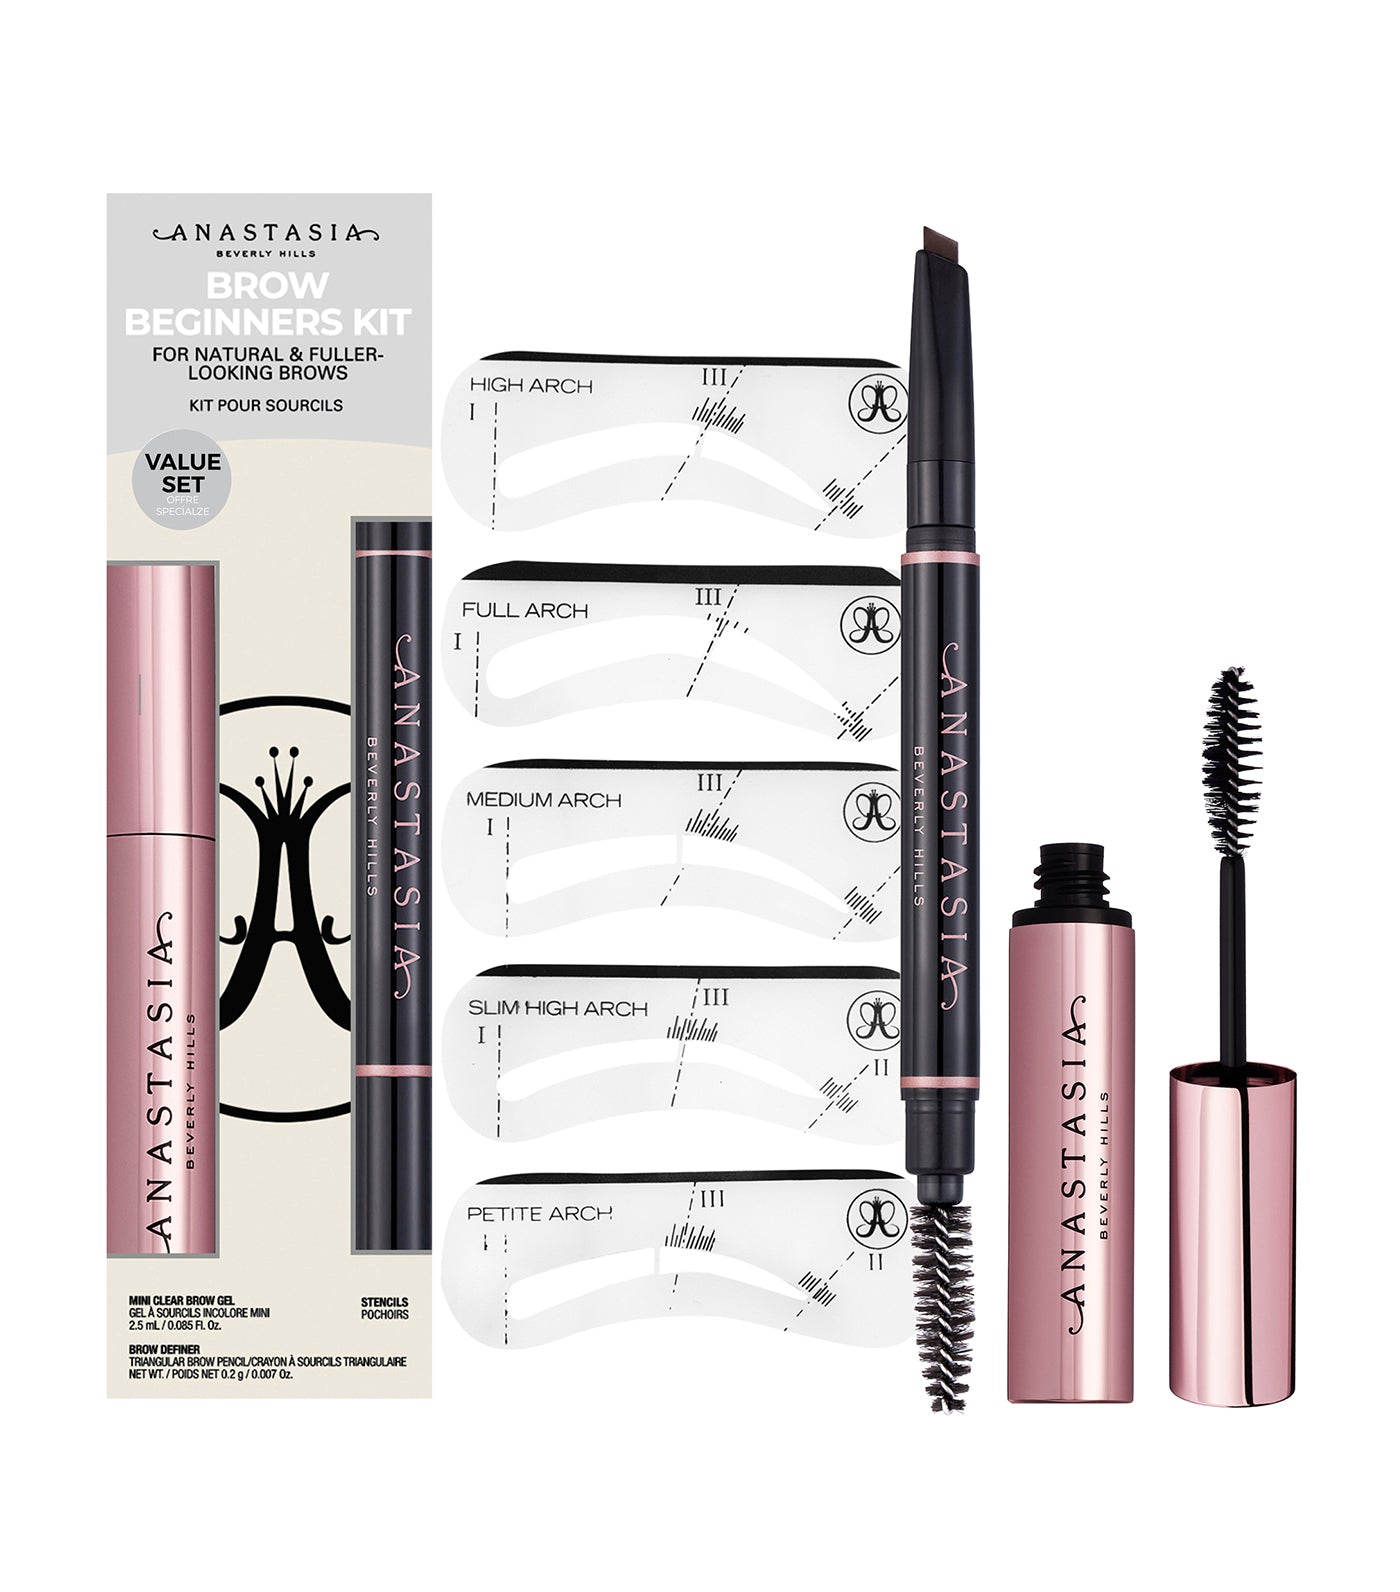 Brow Beginners Kit for Natural and Fuller Looking Brows